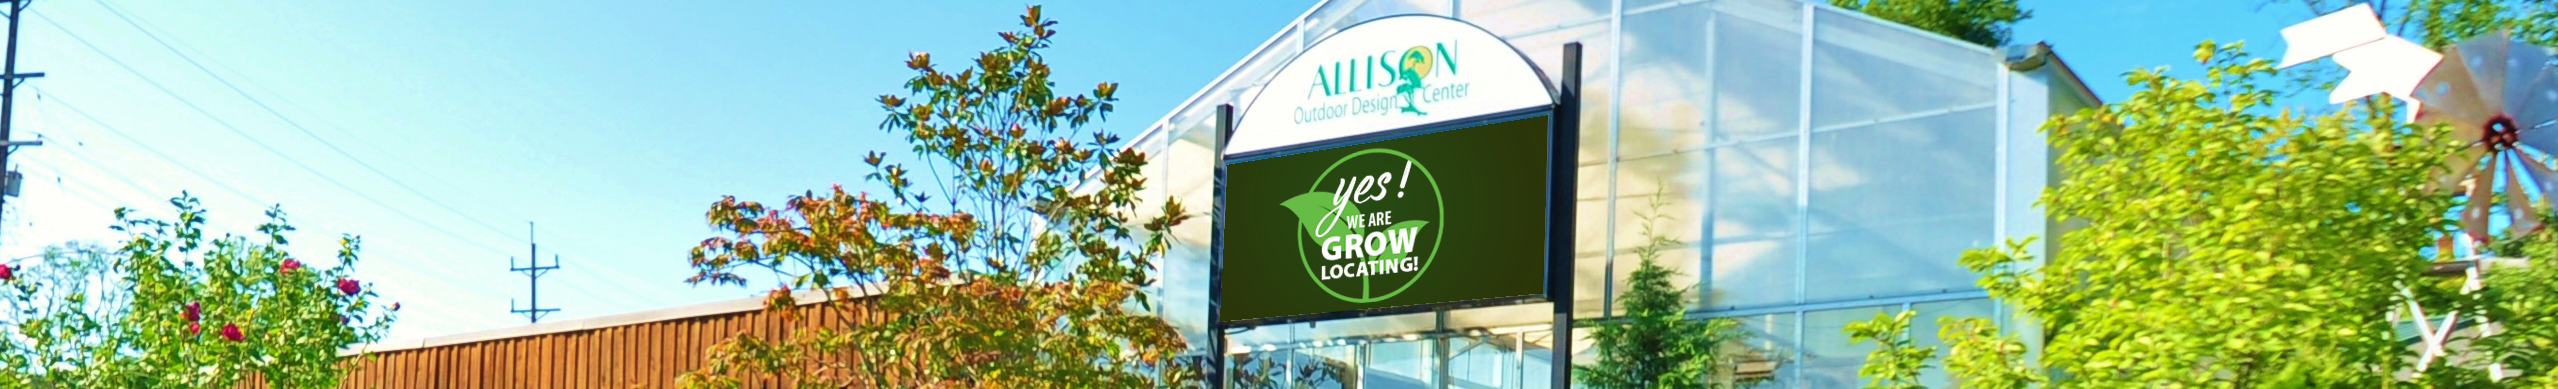 Allison Landscaping Outdoor Garden Center on Anderson Ferry Road